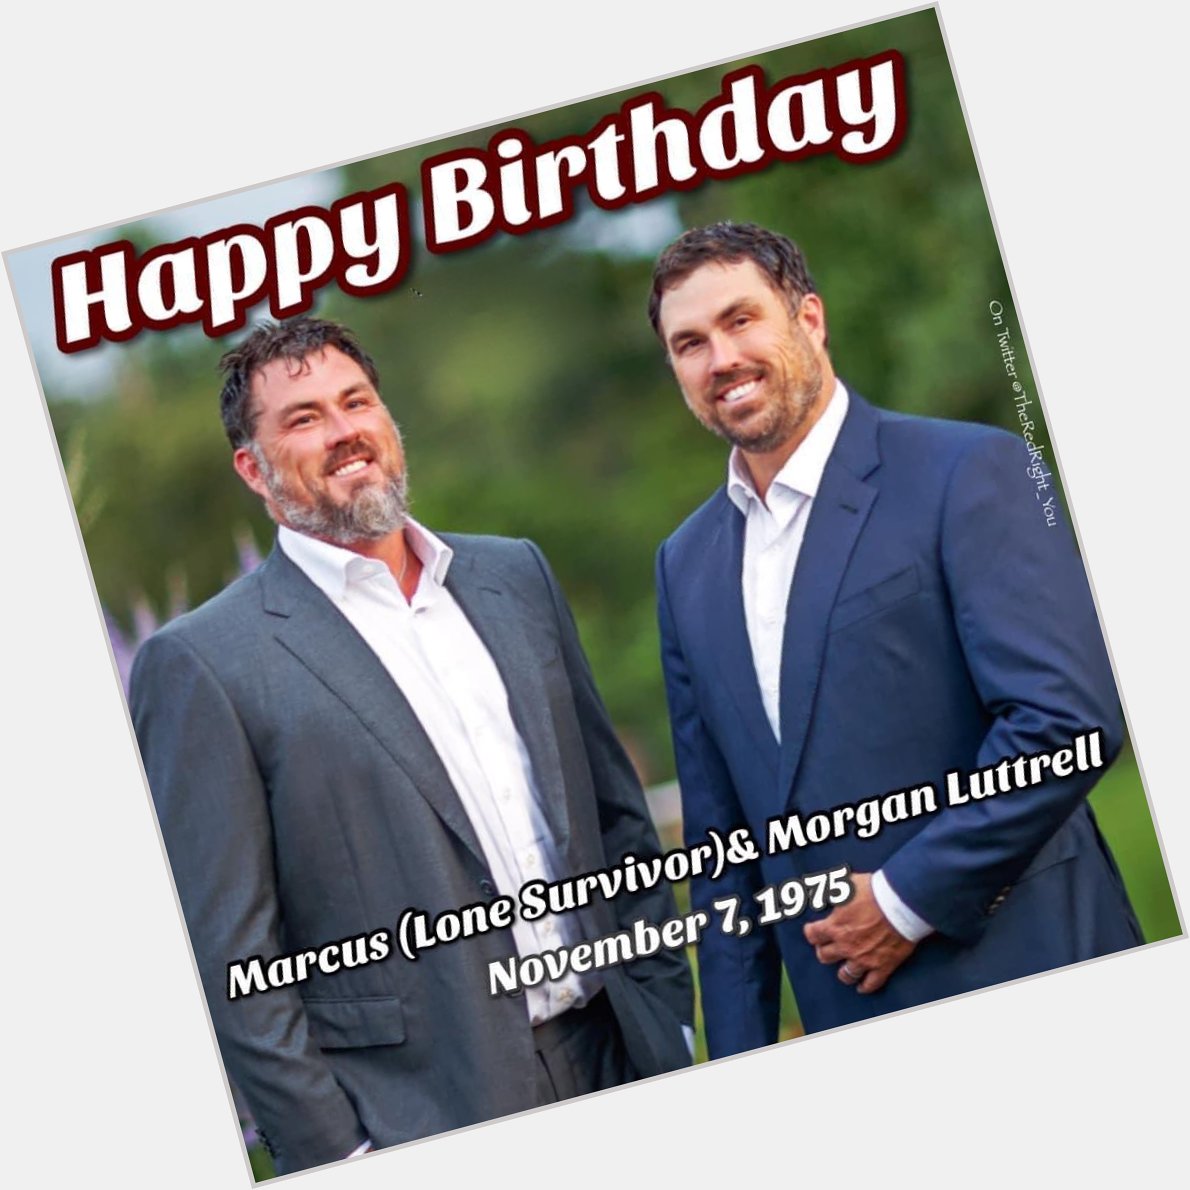 Happy Birthday Marcus Luttrell the Lone Survivor and his twin brother Morgan
(born November 7, 1975) 